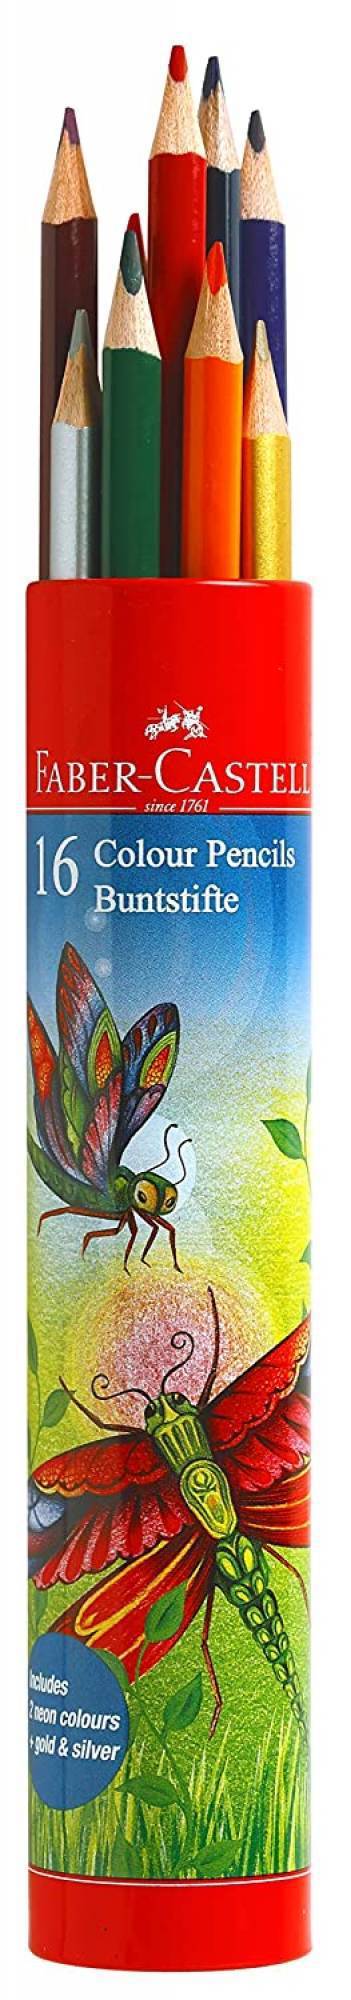 Faber-Castell 118016 Colour Pencils Set Of 16 Round Tin - The Kids Circle